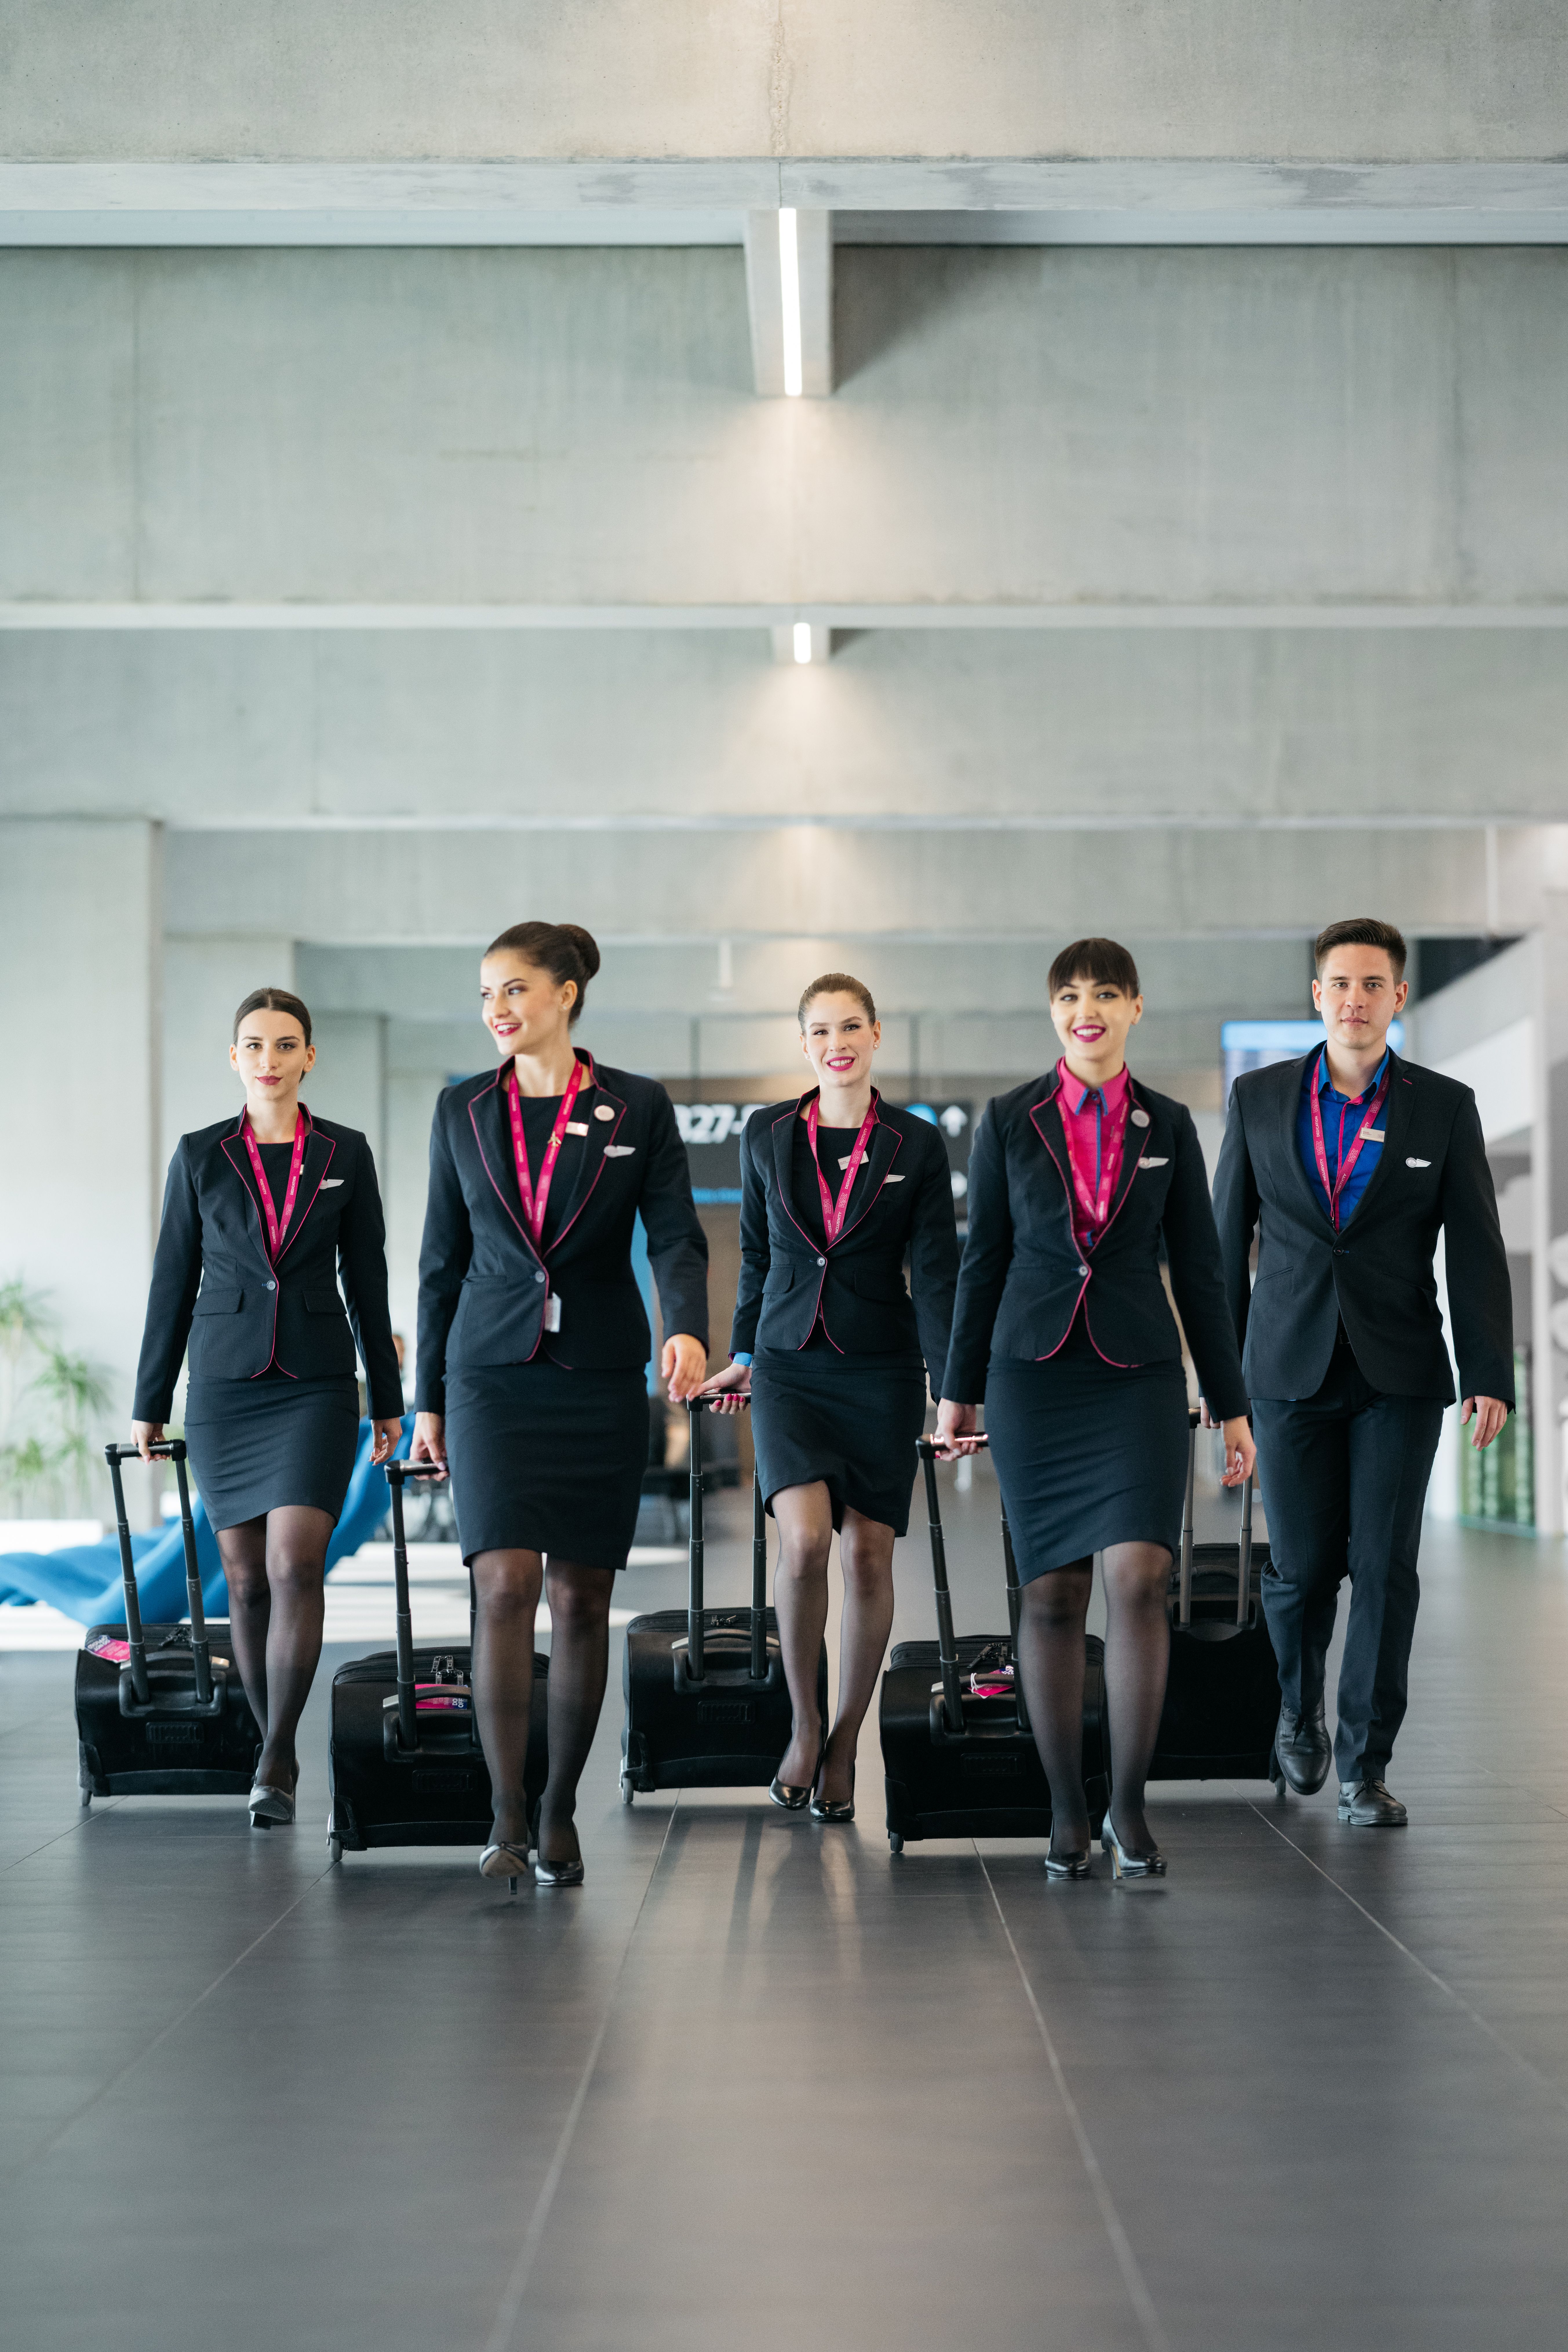 Wizzair cabin crew walking together through a car park.